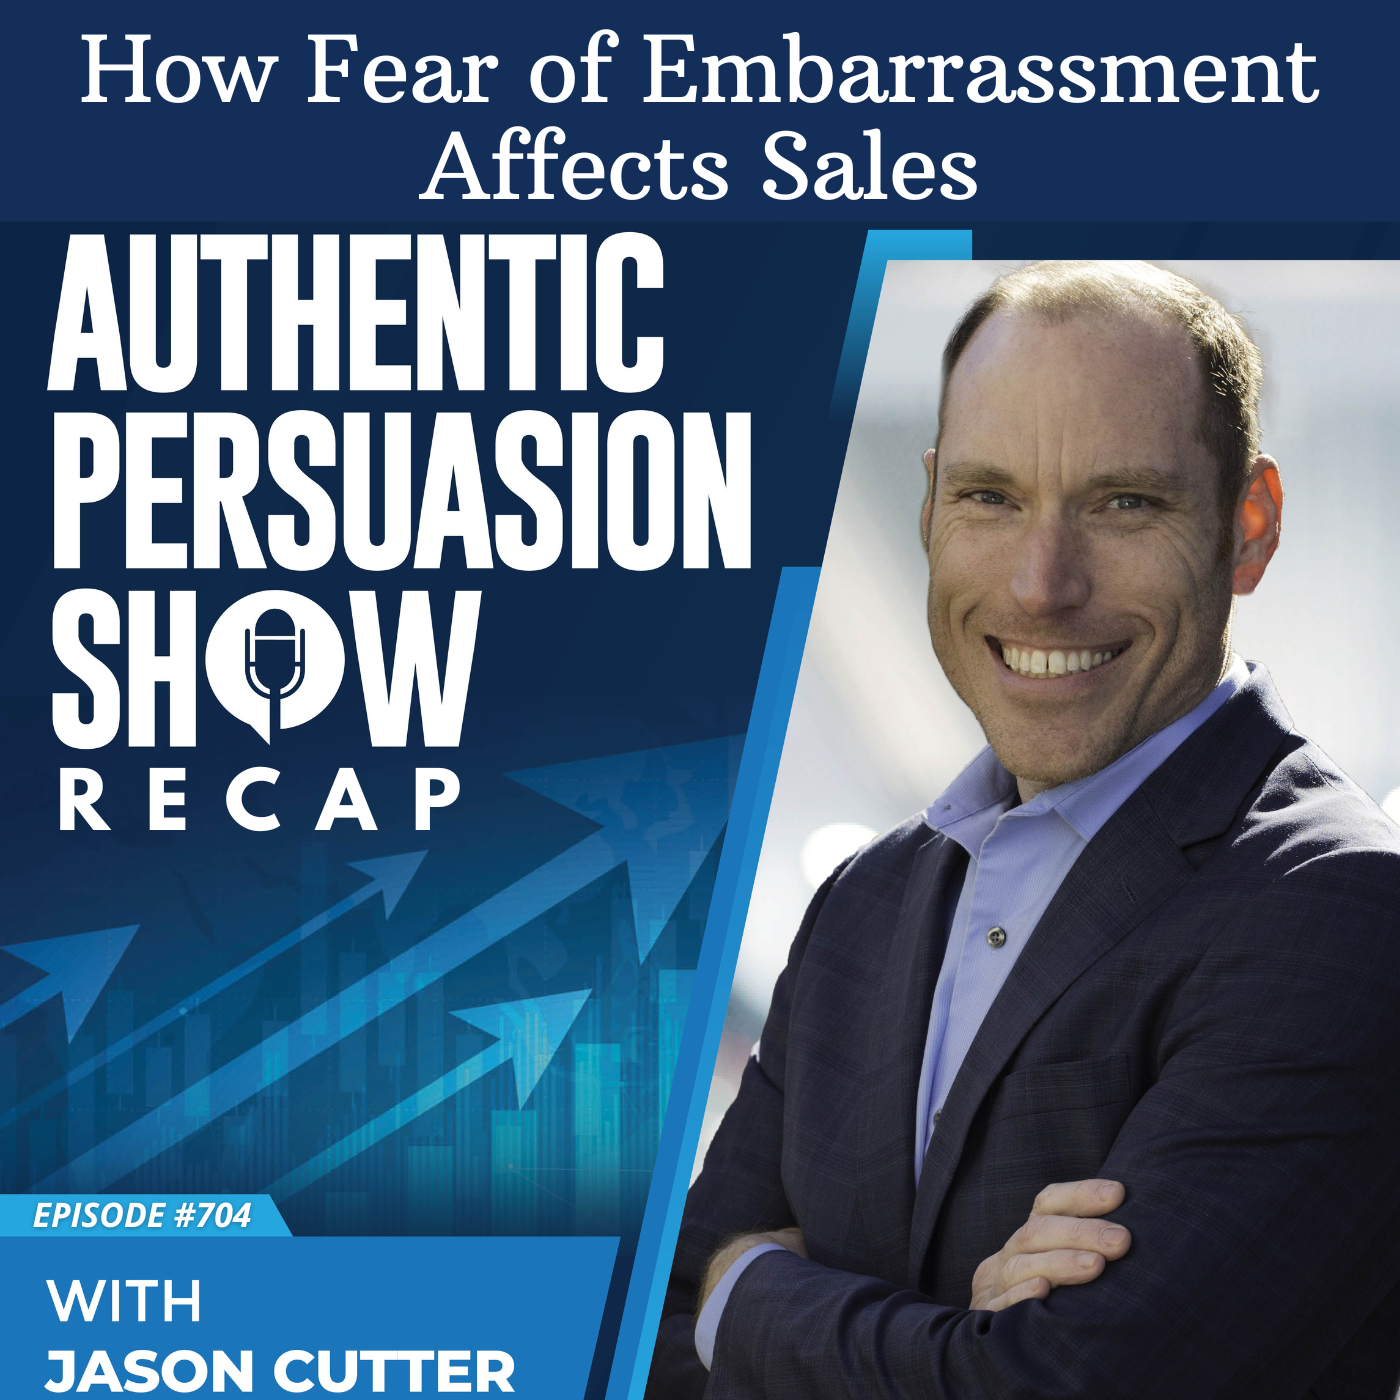 [704] How Fear of Embarrassment Affects Sales